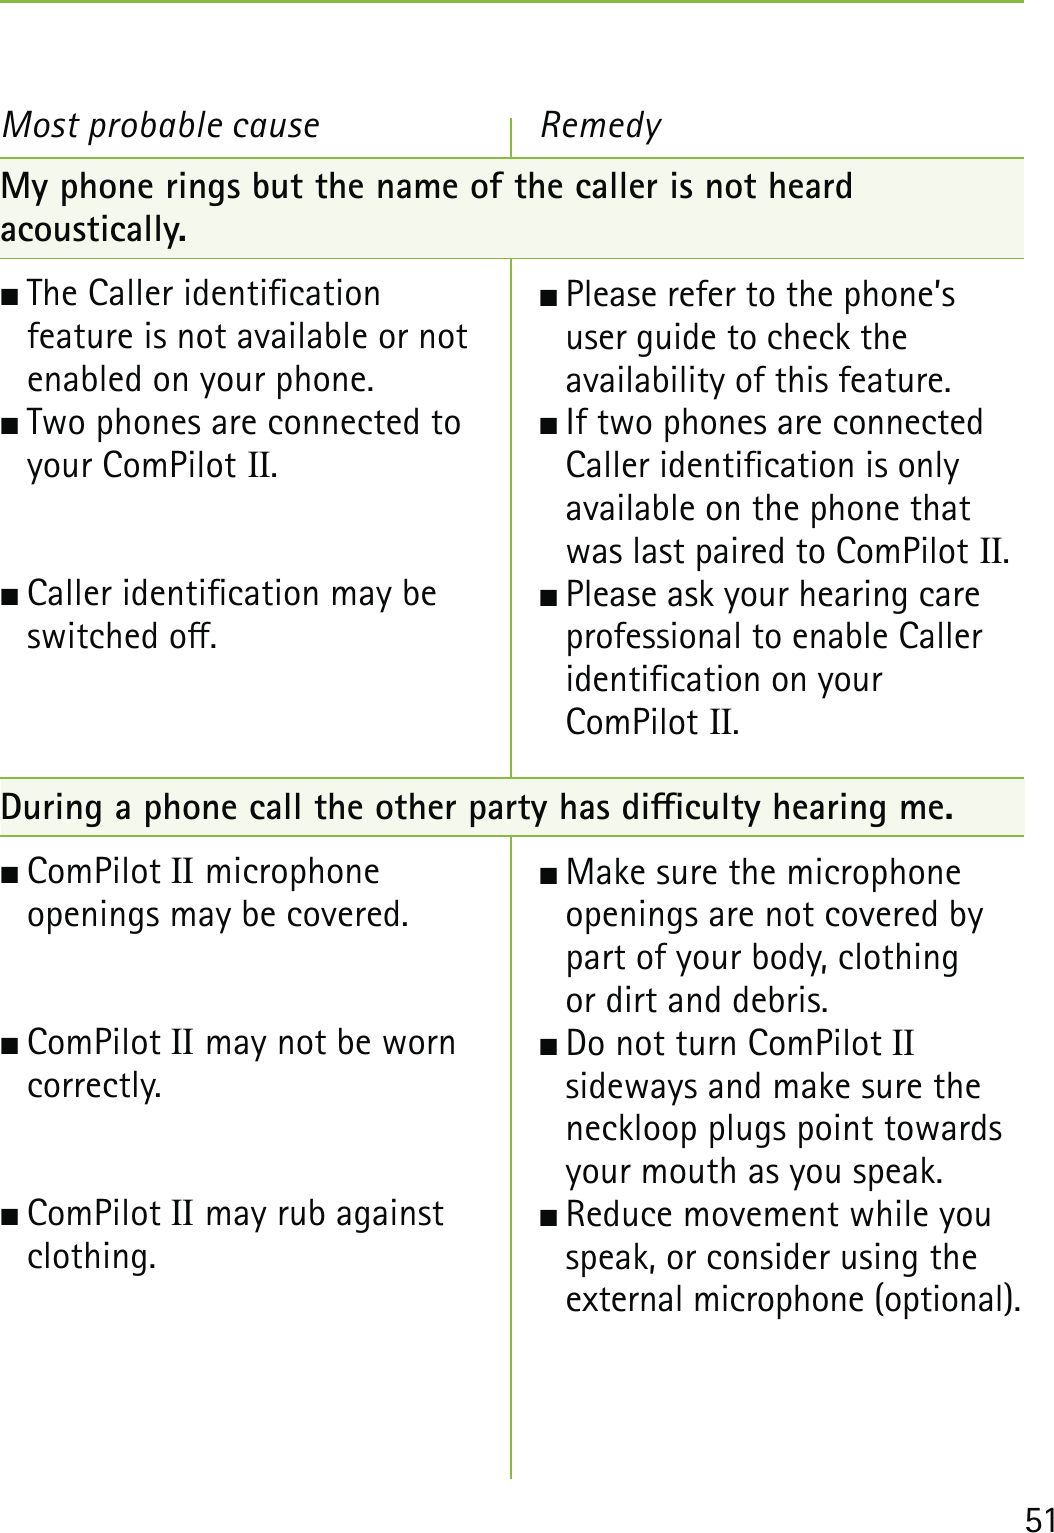 51My phone rings but the name of the caller is not heard  acoustically. The Caller identication  feature is not available or not enabled on your phone. Two phones are connected to  your ComPilot II. Caller identication may be  switched o.During a phone call the other party has diculty hearing me. ComPilot II microphone  openings may be covered. ComPilot II may not be worn  correctly. ComPilot II may rub against clothing. Most probable cause Please refer to the phone’s user guide to check the  availability of this feature. If two phones are connected Caller identication is only available on the phone that was last paired to ComPilot II. Please ask your hearing care professional to enable Caller identication on your  ComPilot II. Make sure the microphone openings are not covered by part of your body, clothing  or dirt and debris. Do not turn ComPilot II  sideways and make sure the neckloop plugs point towards your mouth as you speak. Reduce movement while you speak, or consider using the external microphone (optional).Remedy